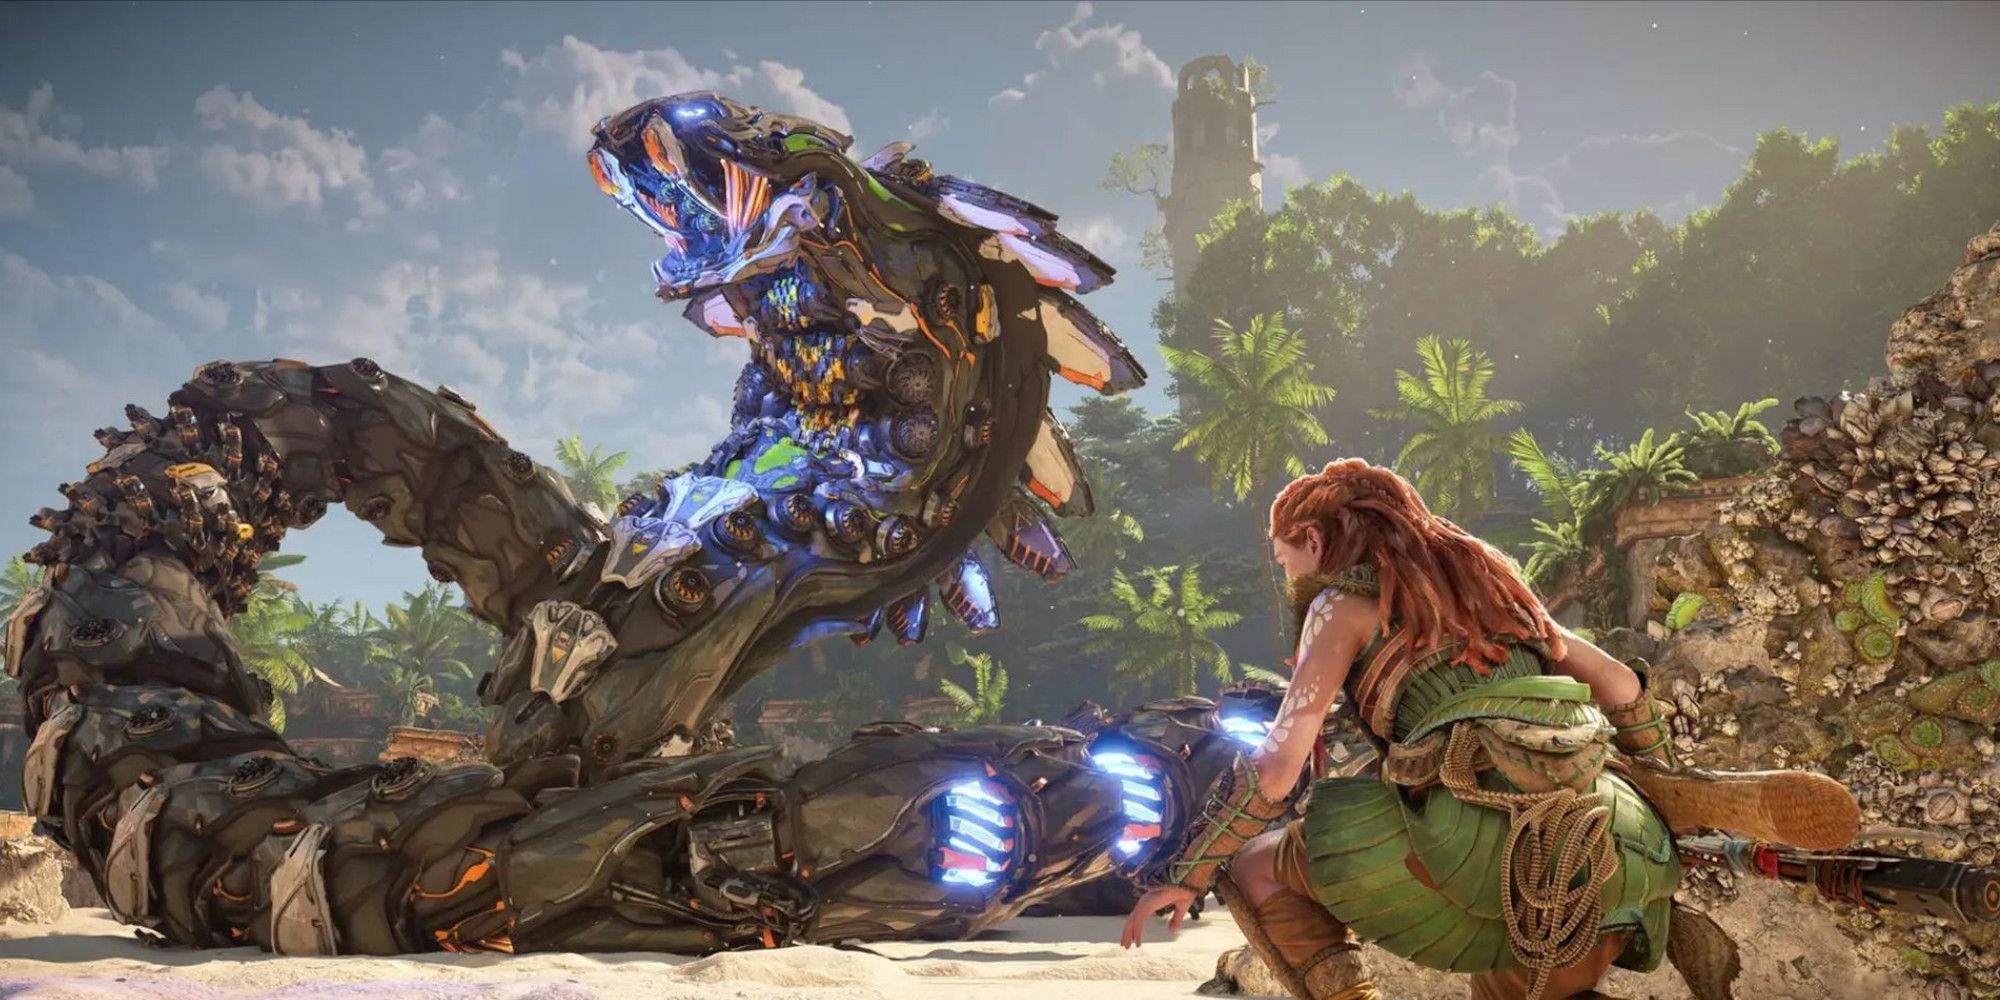 Aloy crouches near a snake-like robot